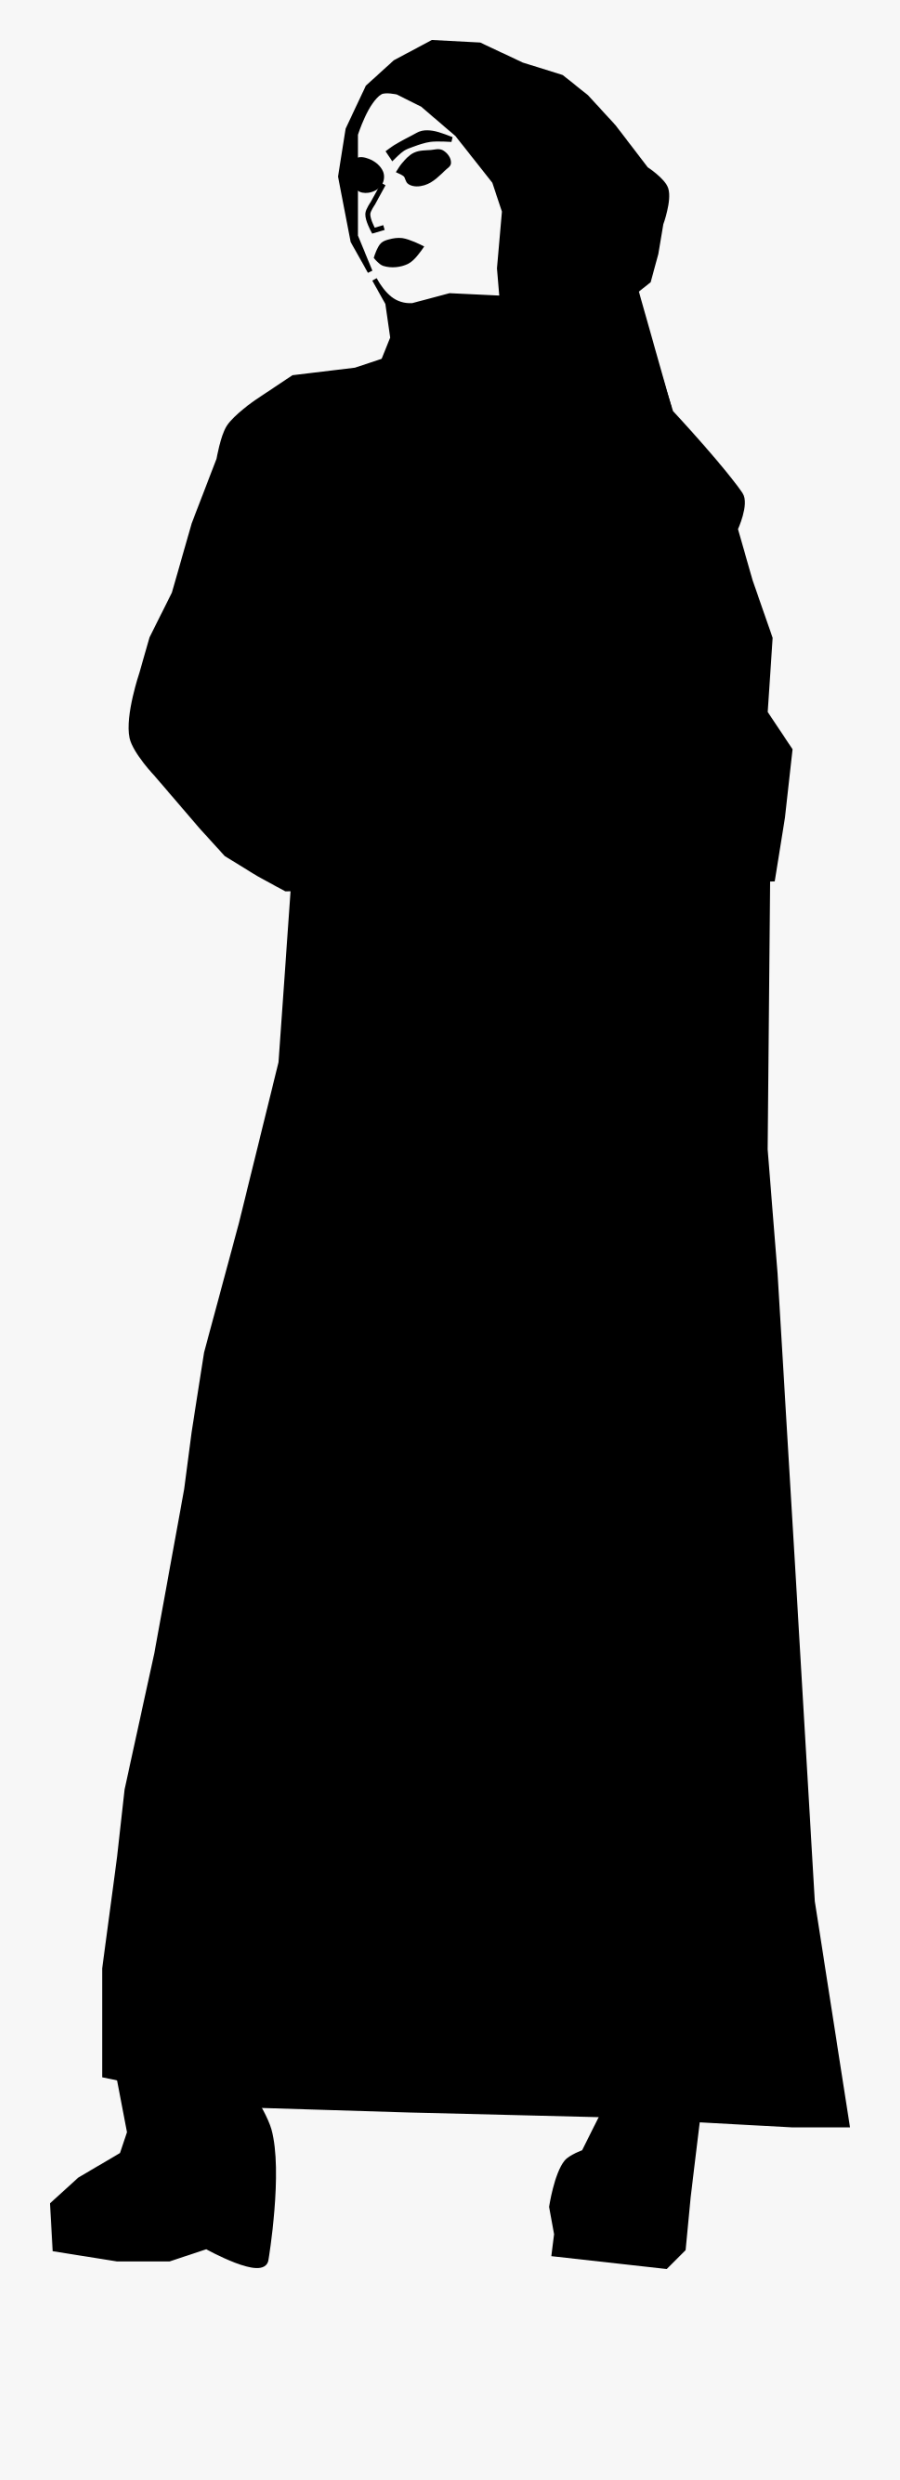 Muslim Woman Cliparts - Silhouette Hijab Girl Png, Transparent Clipart